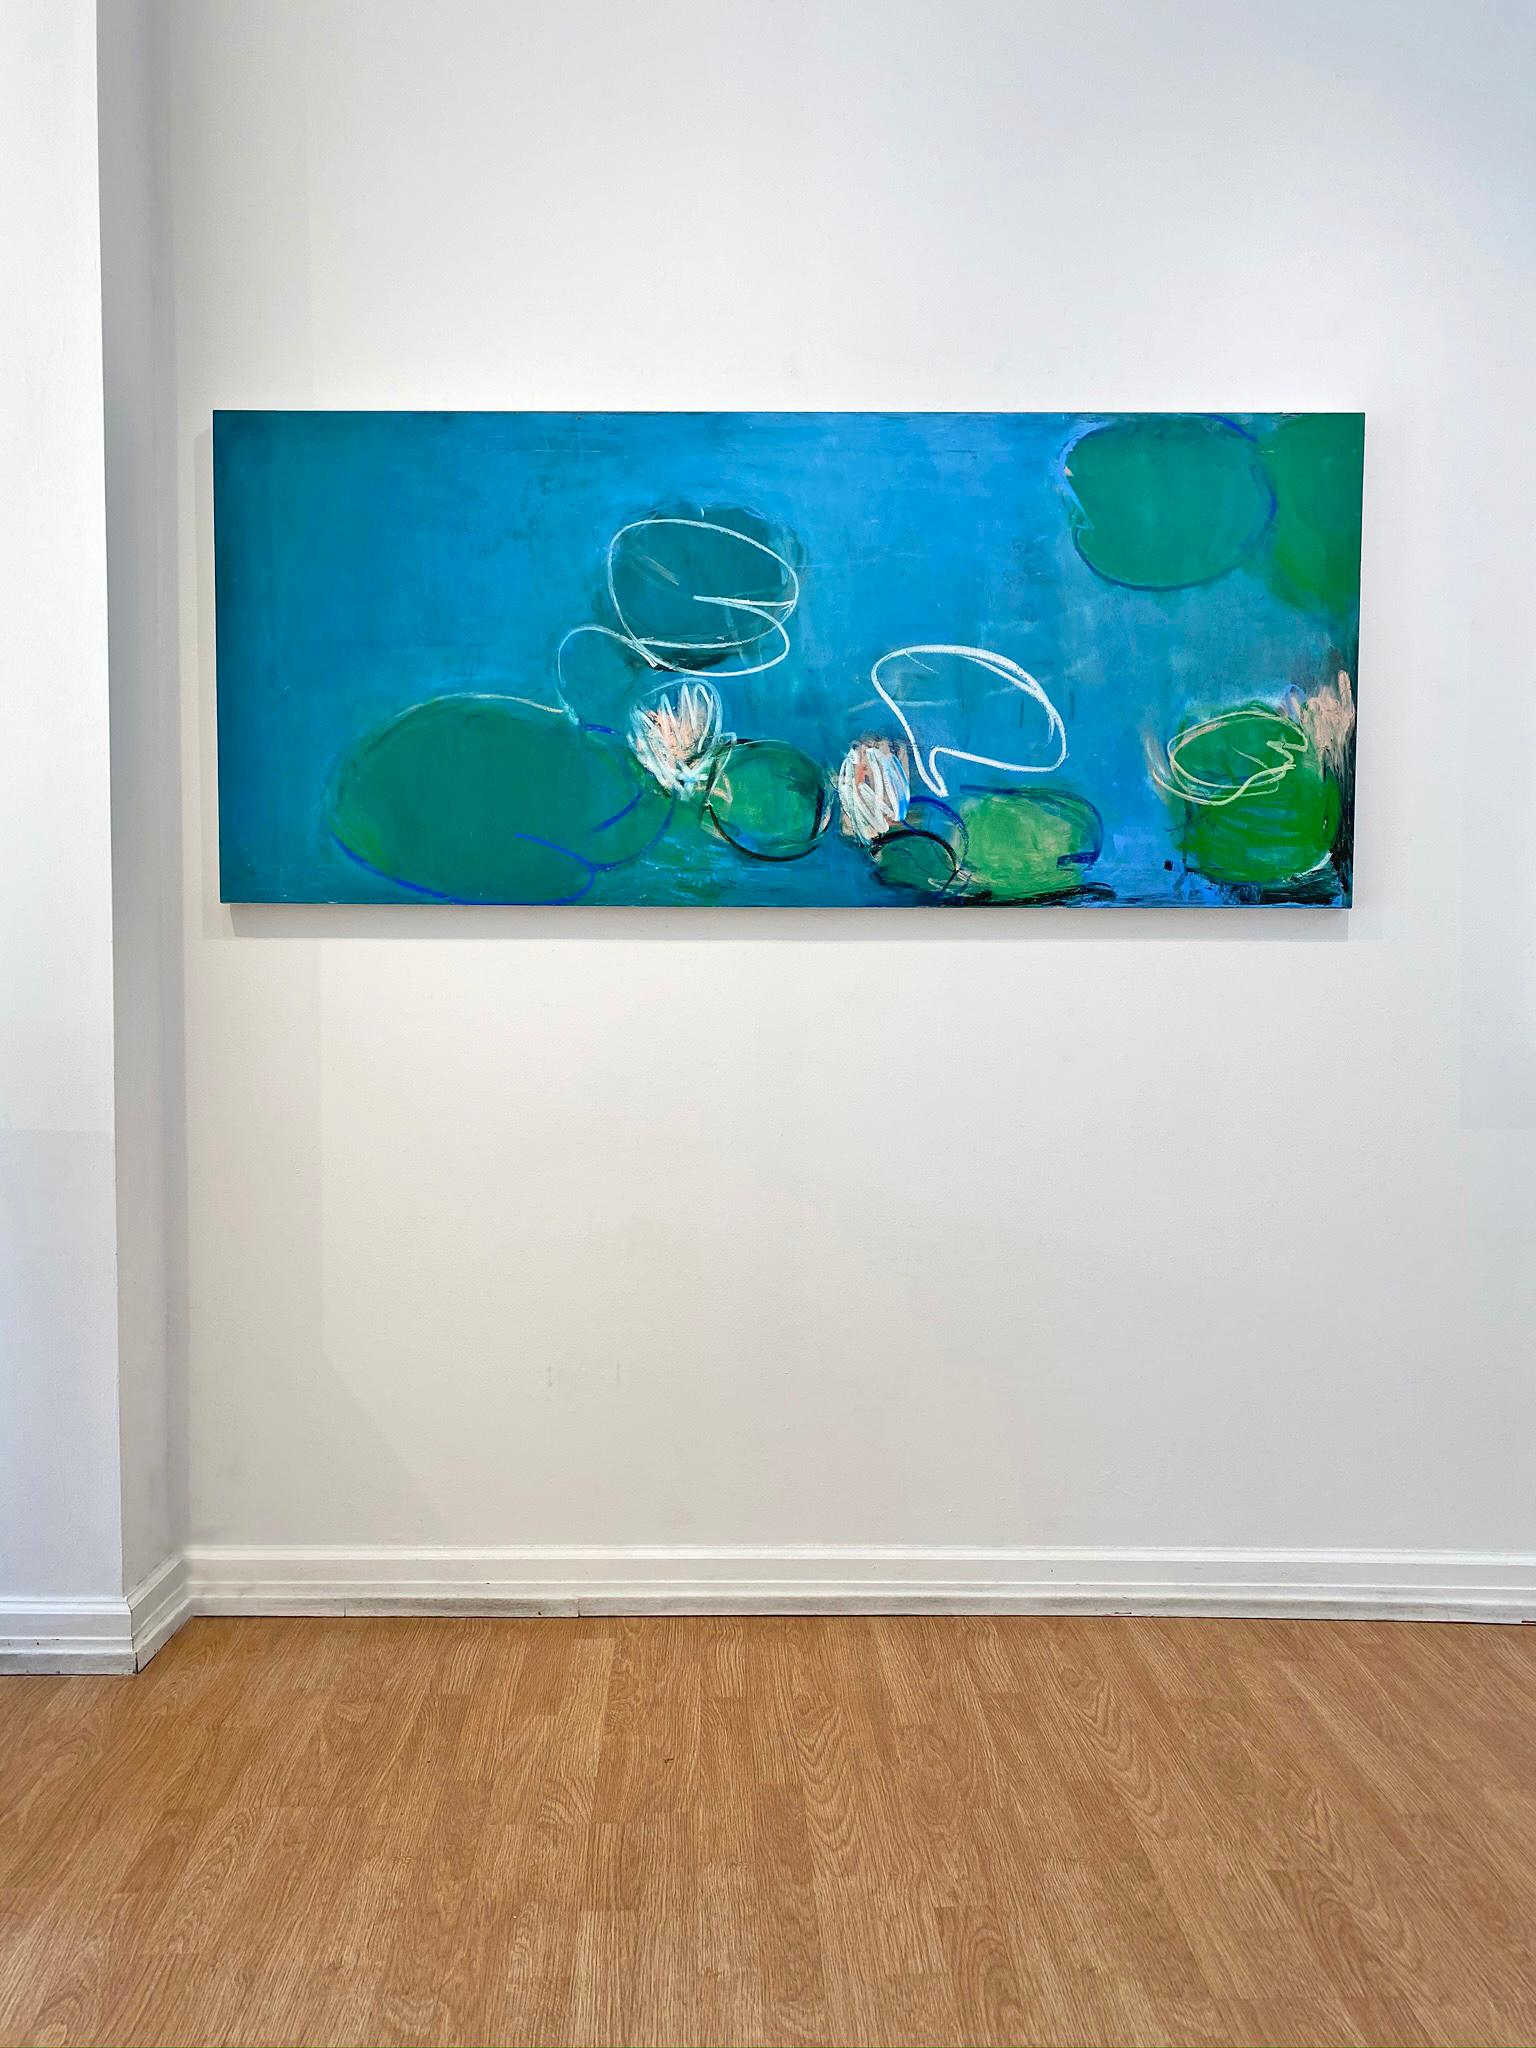 'Lilies' in 2019 by New York City base, French artist Sandrine Kern. Oil and cold wax on canvas, 30 x 70 in. This abstracted landscape painting features a pond and water lily scene in colors of blue, pink, white, green, and black.

Sandrine Kern's